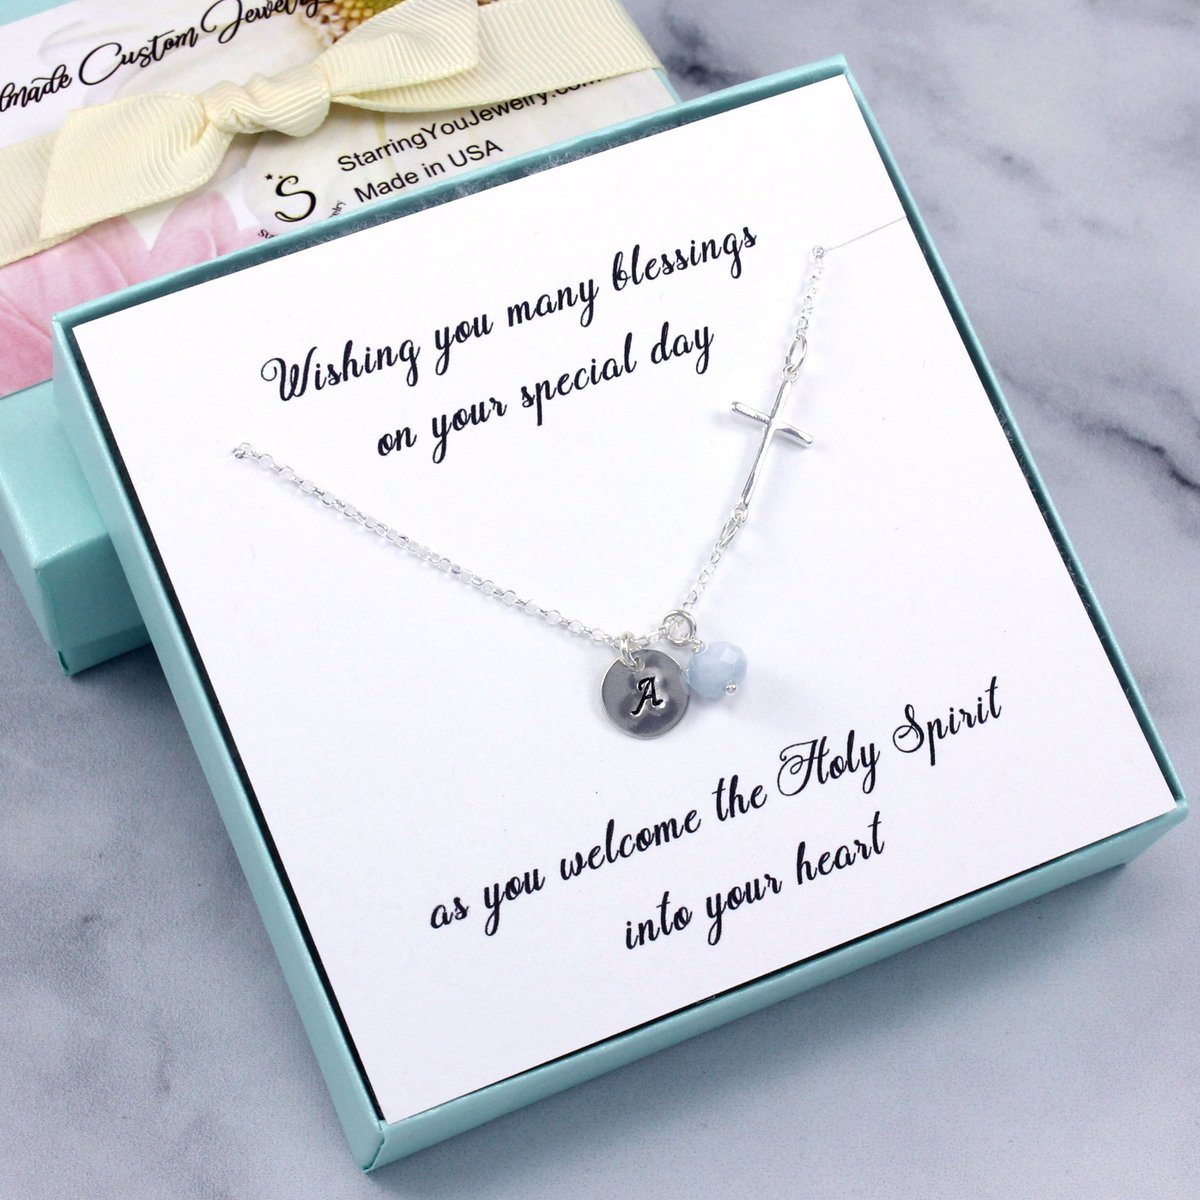 Personalized Confirmation Gift, Cross Initial Necklace Sterling Silver, Gemstone Charm, First Communion Gift, Confirmation Gifts for Girls tuppu.net/6aff4718 #Etsy #etsyjewelry #handmadejewelry #etsygifts #etsyseller #giftideas #etsyfinds #giftsforher